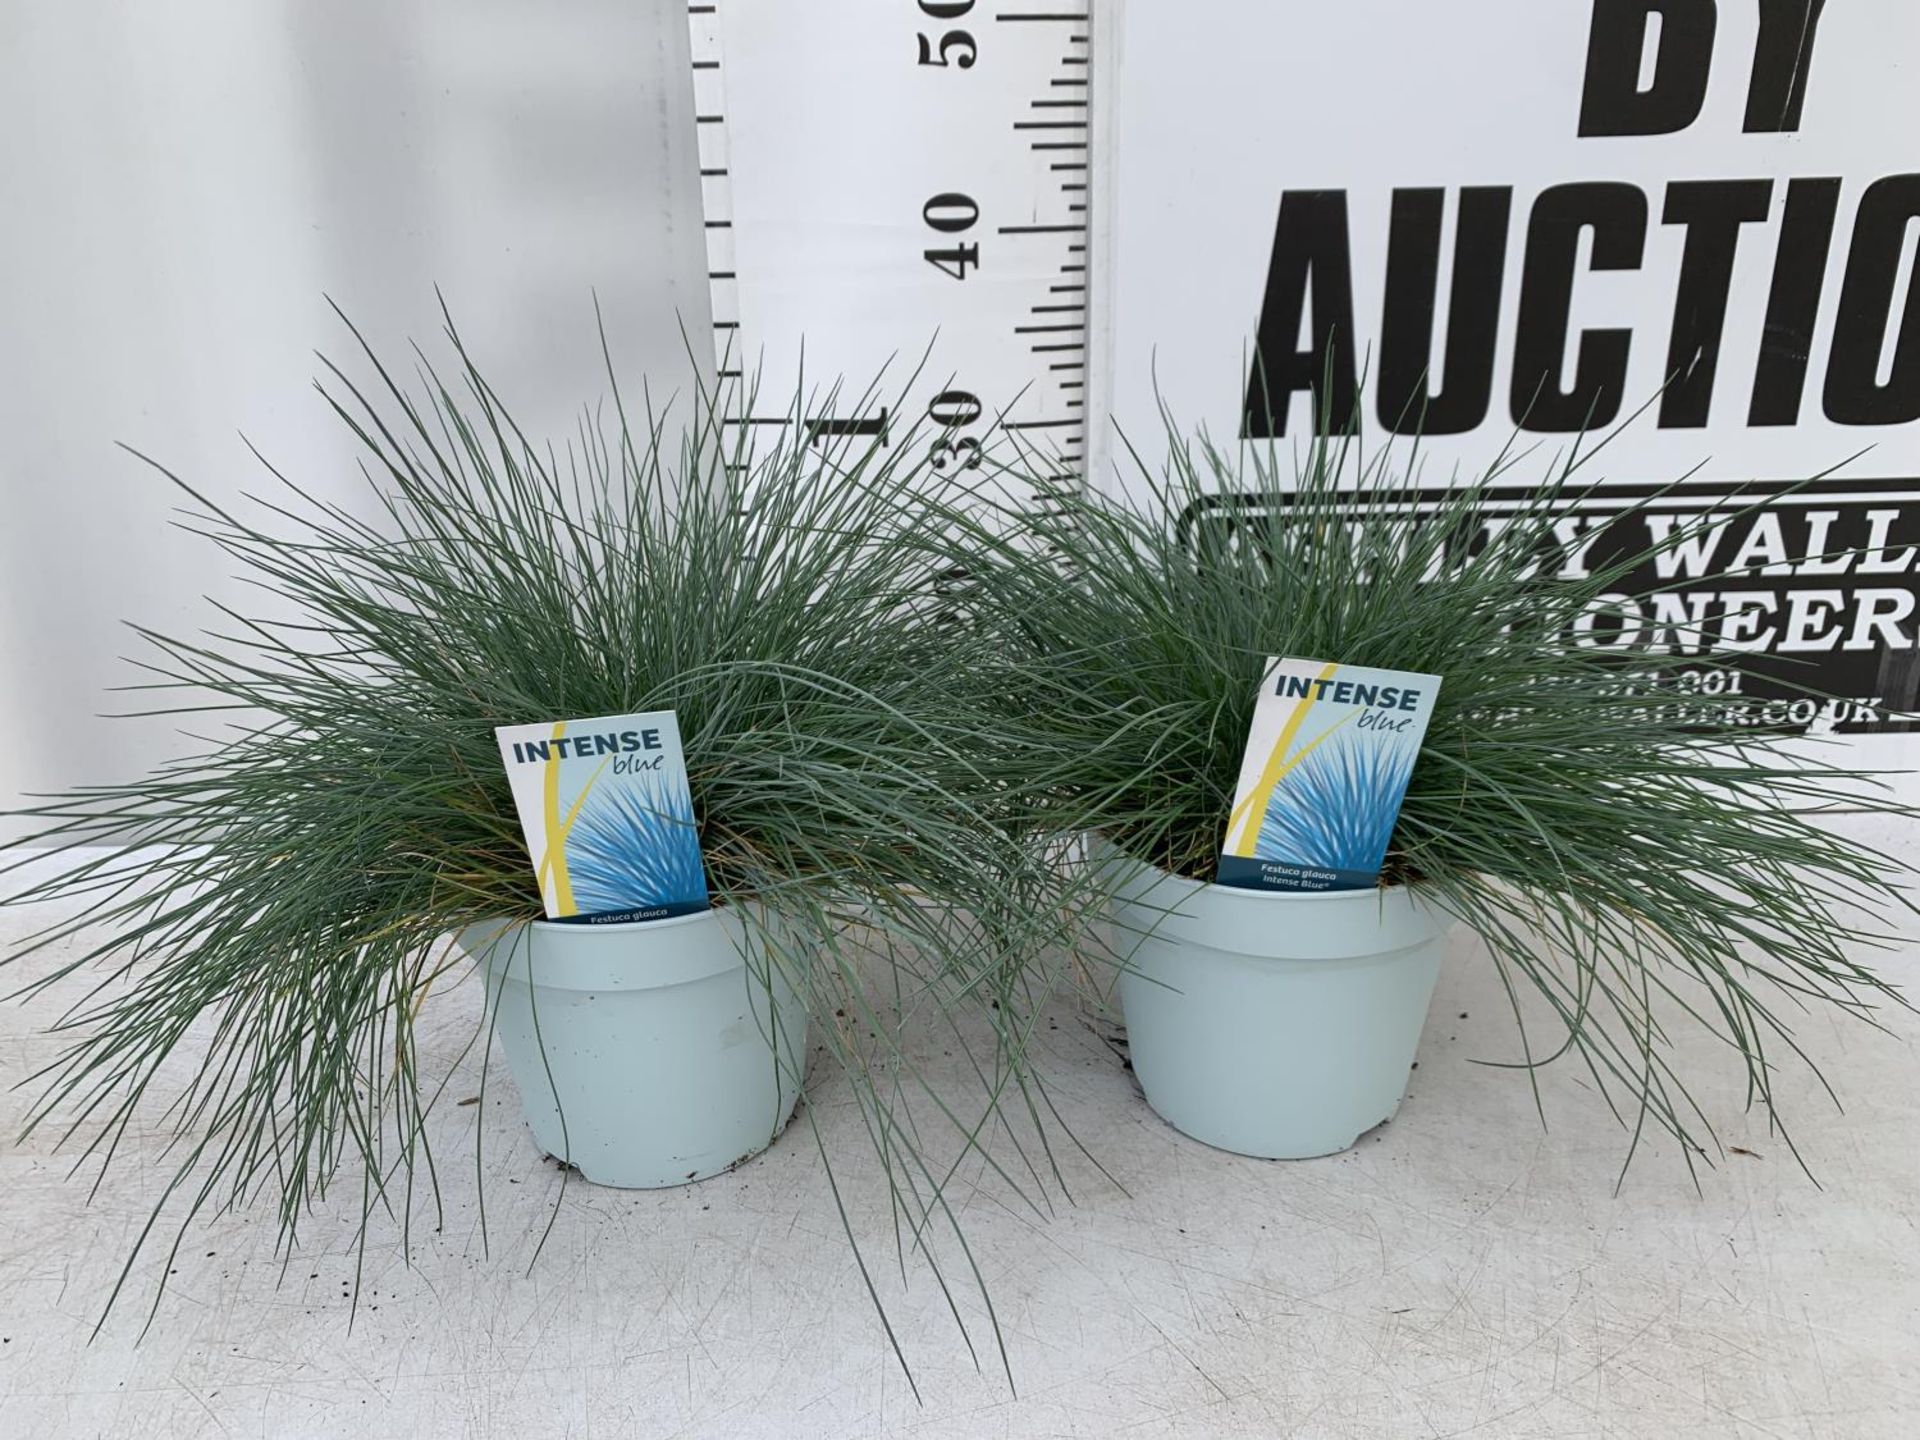 TWO FESTUCA GLAUCA 'INTENSE BLUE' ORNAMENTAL GRASSES IN 2 LTR POTS APPROX 35CM IN HEIGHT PLUS VAT TO